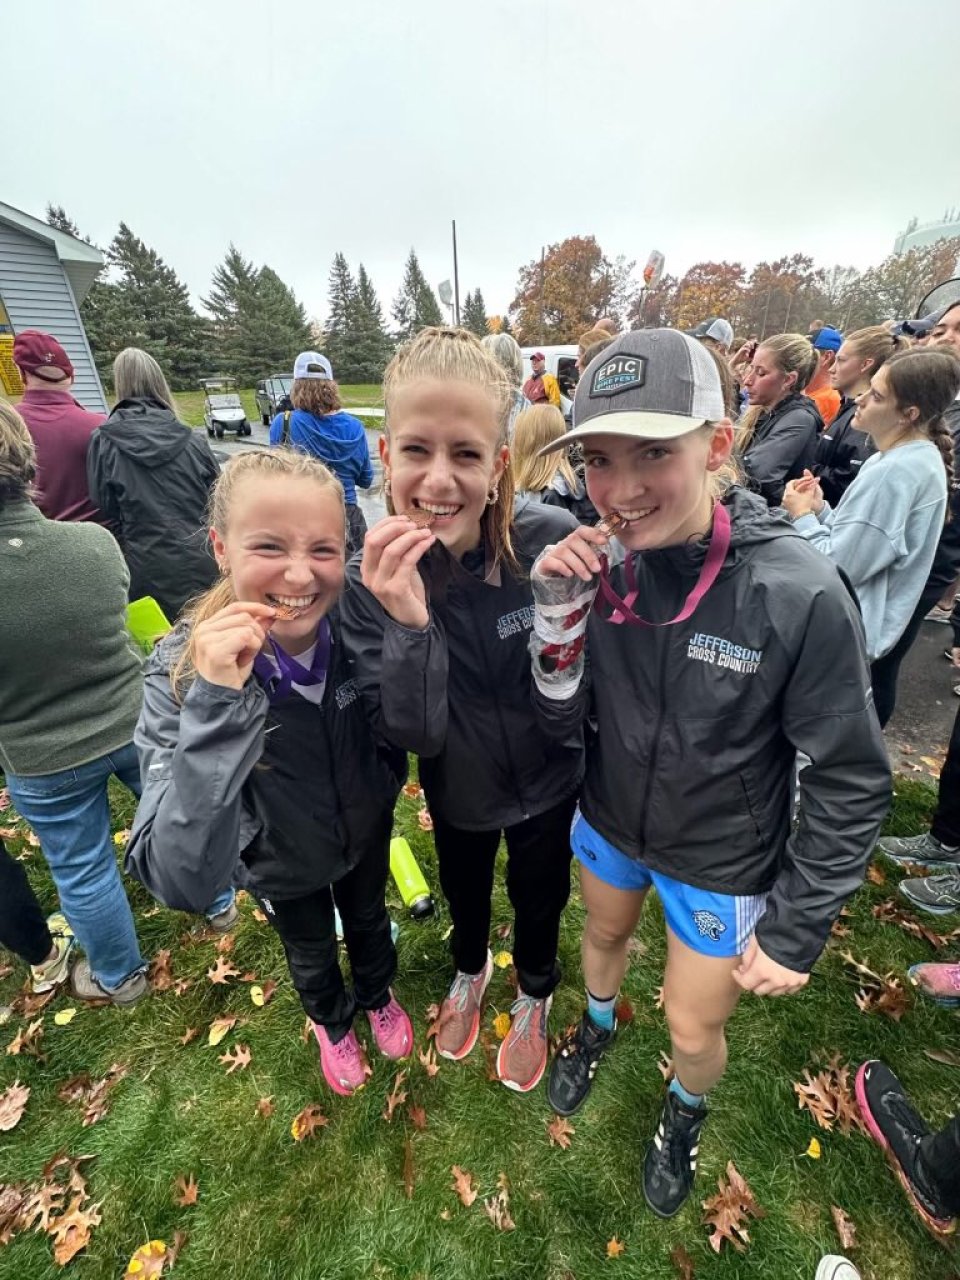 Three girls cross country athletes biting medals